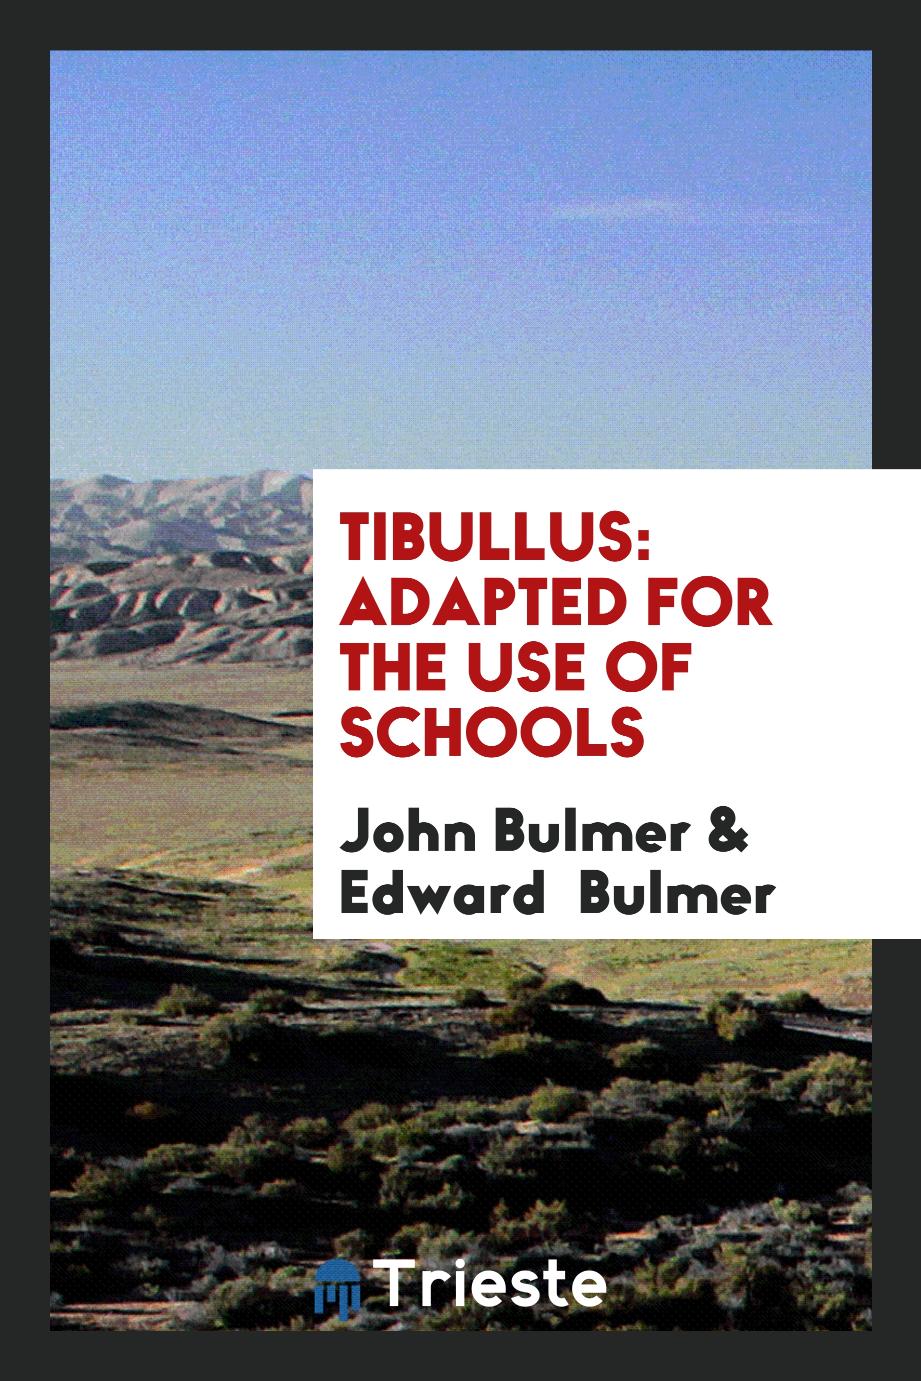 Tibullus: adapted for the use of schools